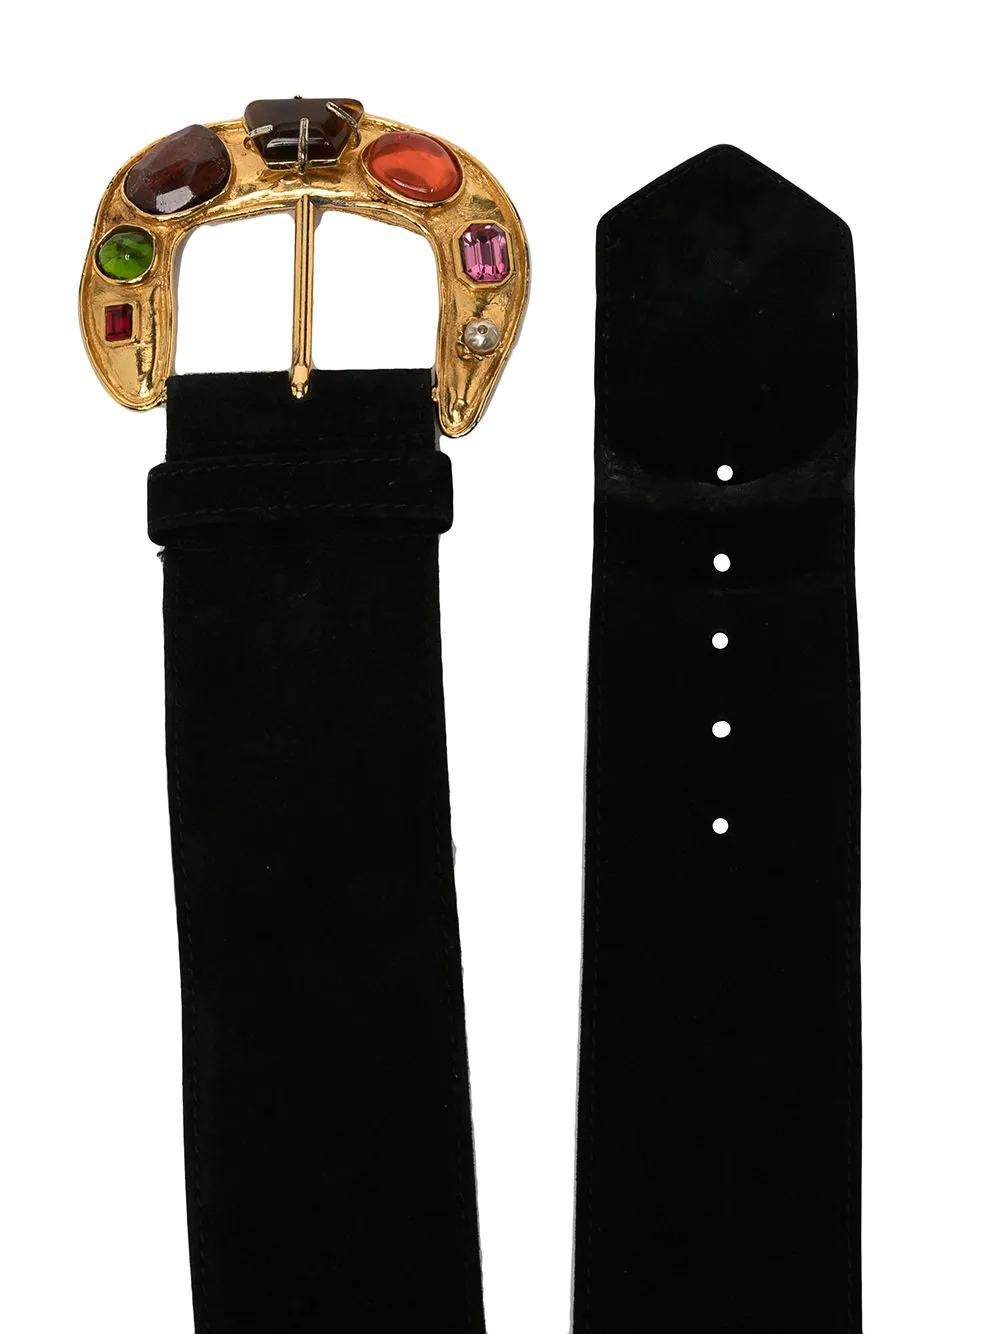 Crafted from black suede, this unique pre-owned Christian Lacroix belt features a resin cabochon and gold-toned hammered metal buckle. Thread it through the belt loops of jeans and mini skirts to add colour to a simple outfit. 

Colour: